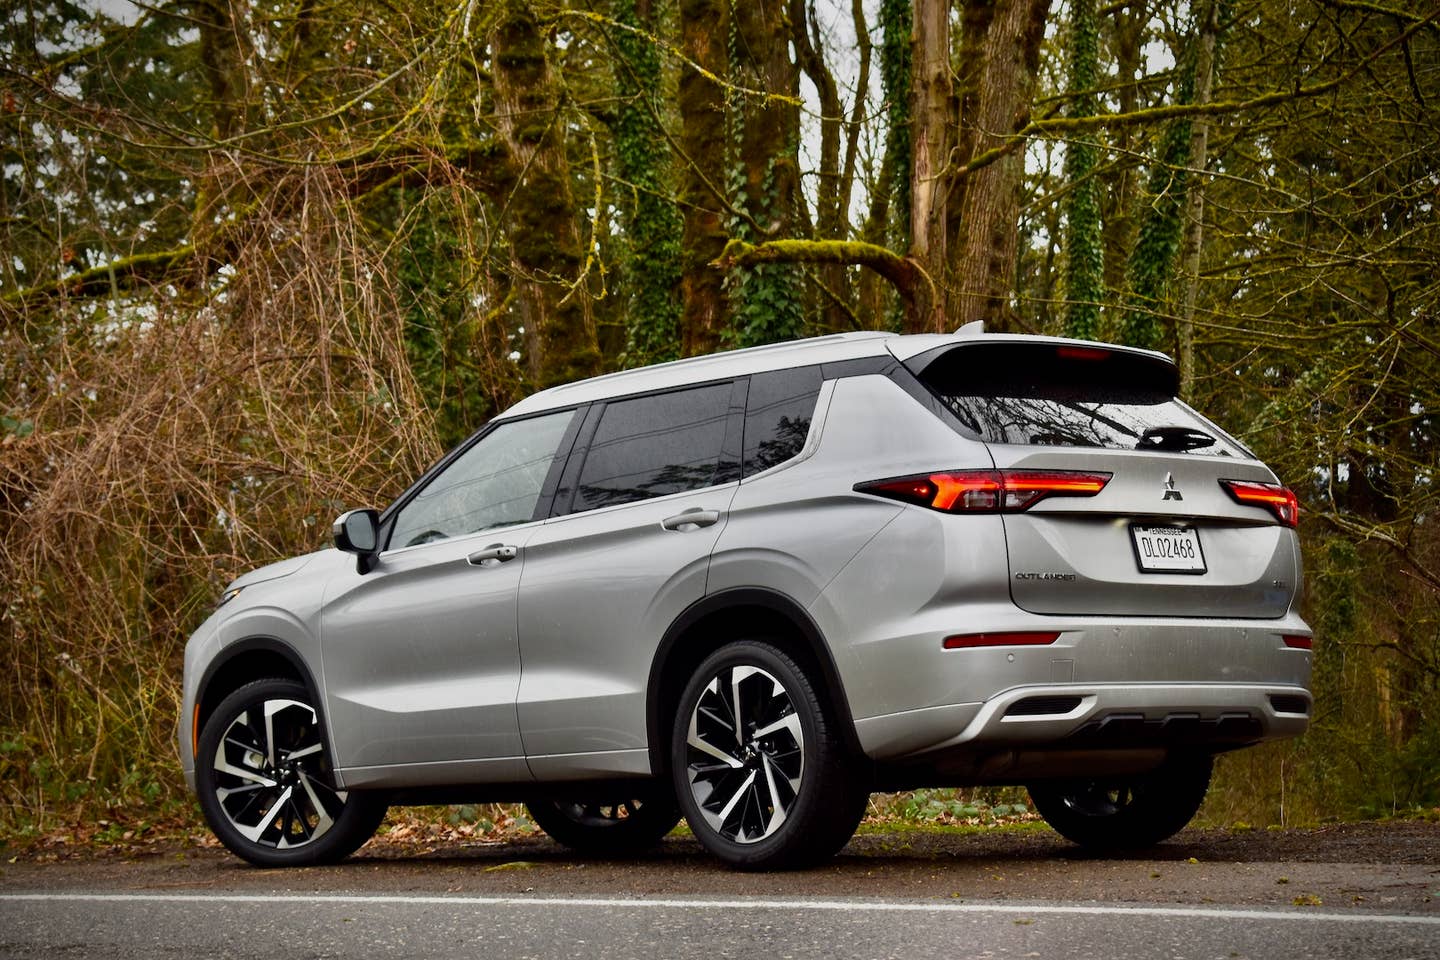 2023 Mitsubishi Outlander SEL S-AWC in the forests of Oregon.